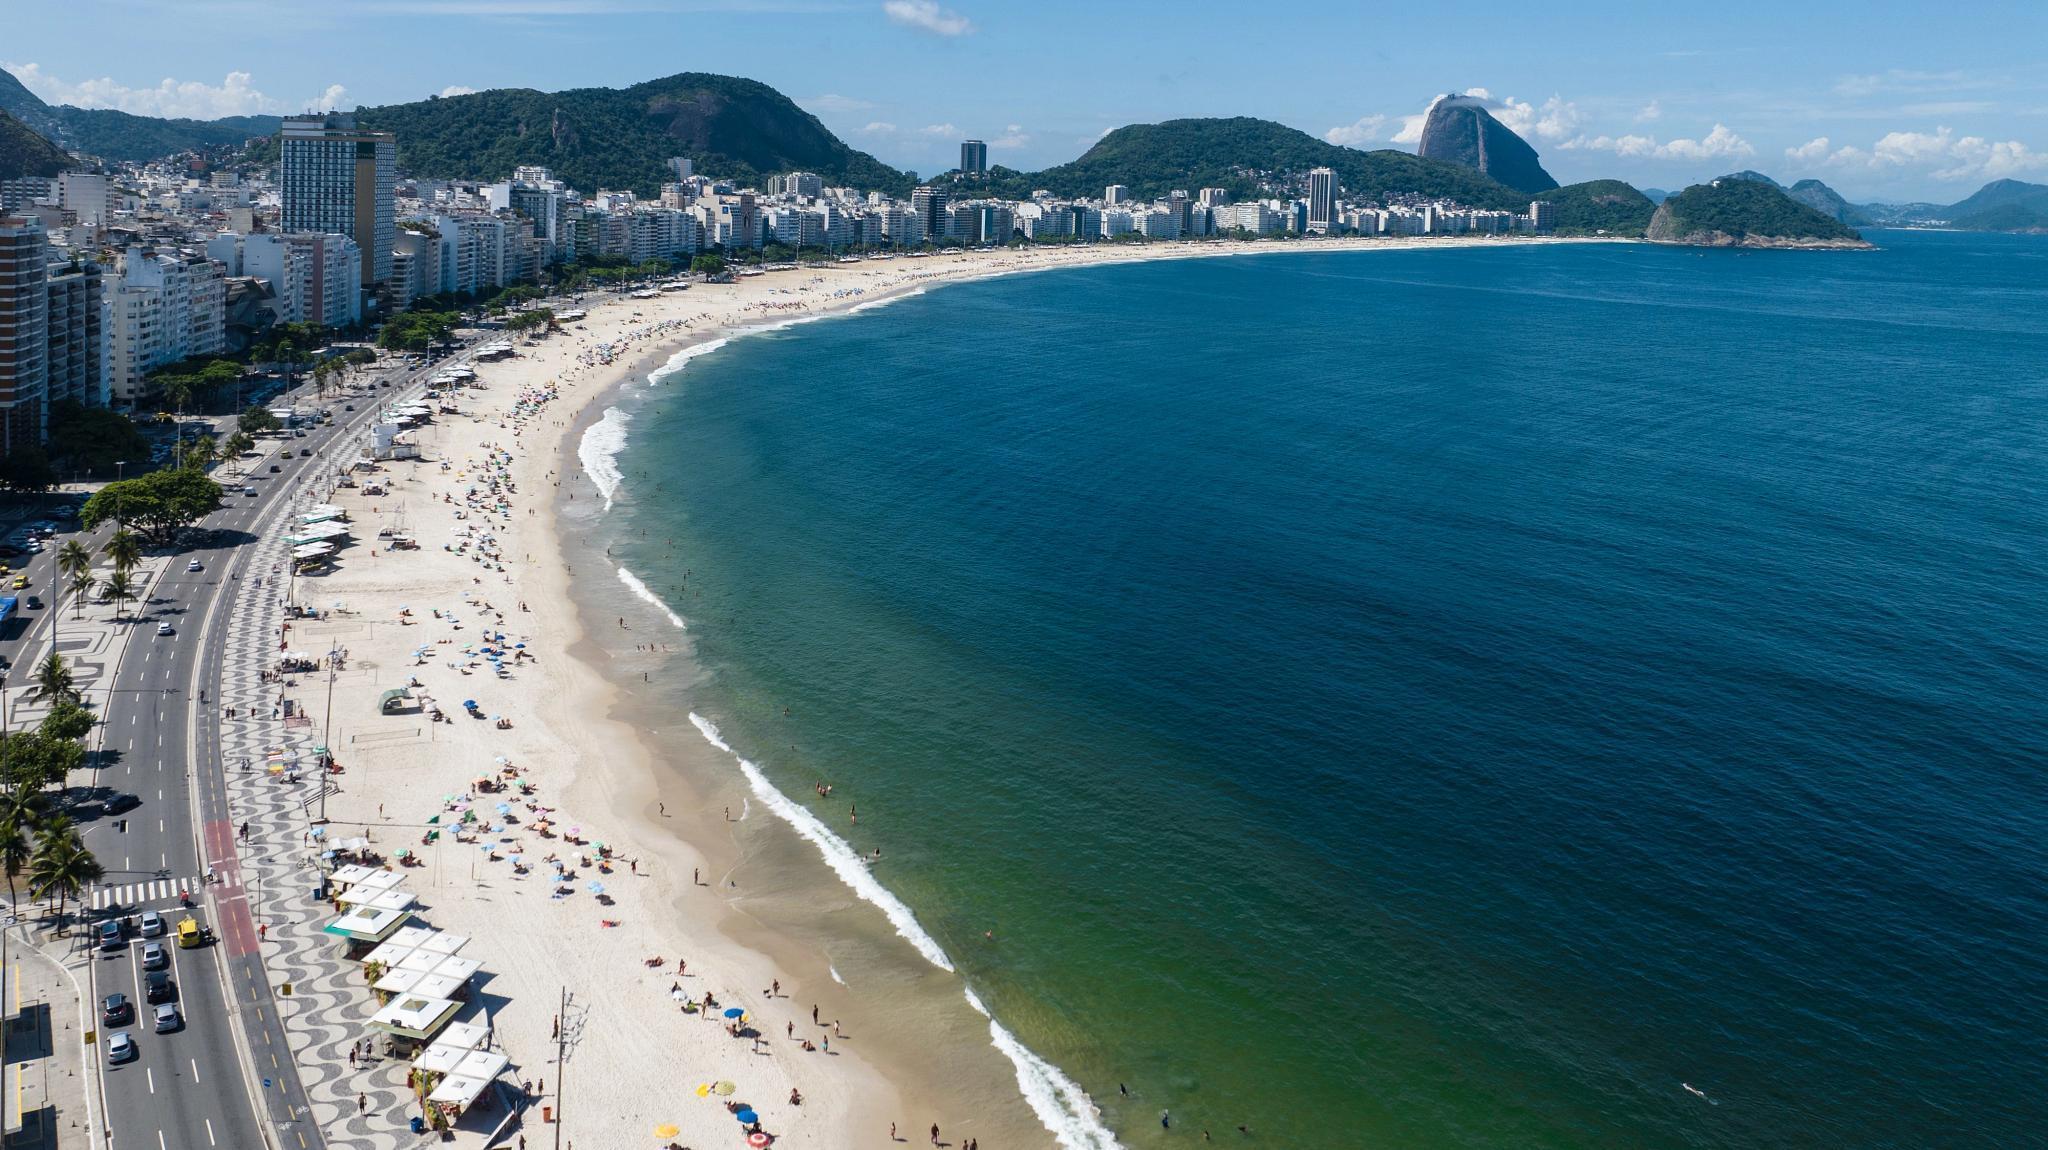 Attractions such as Copacabana Beach in Rio de Janeiro, Brazil, are keeping visitor traffic strong in several Latin American countries. (Getty Images)